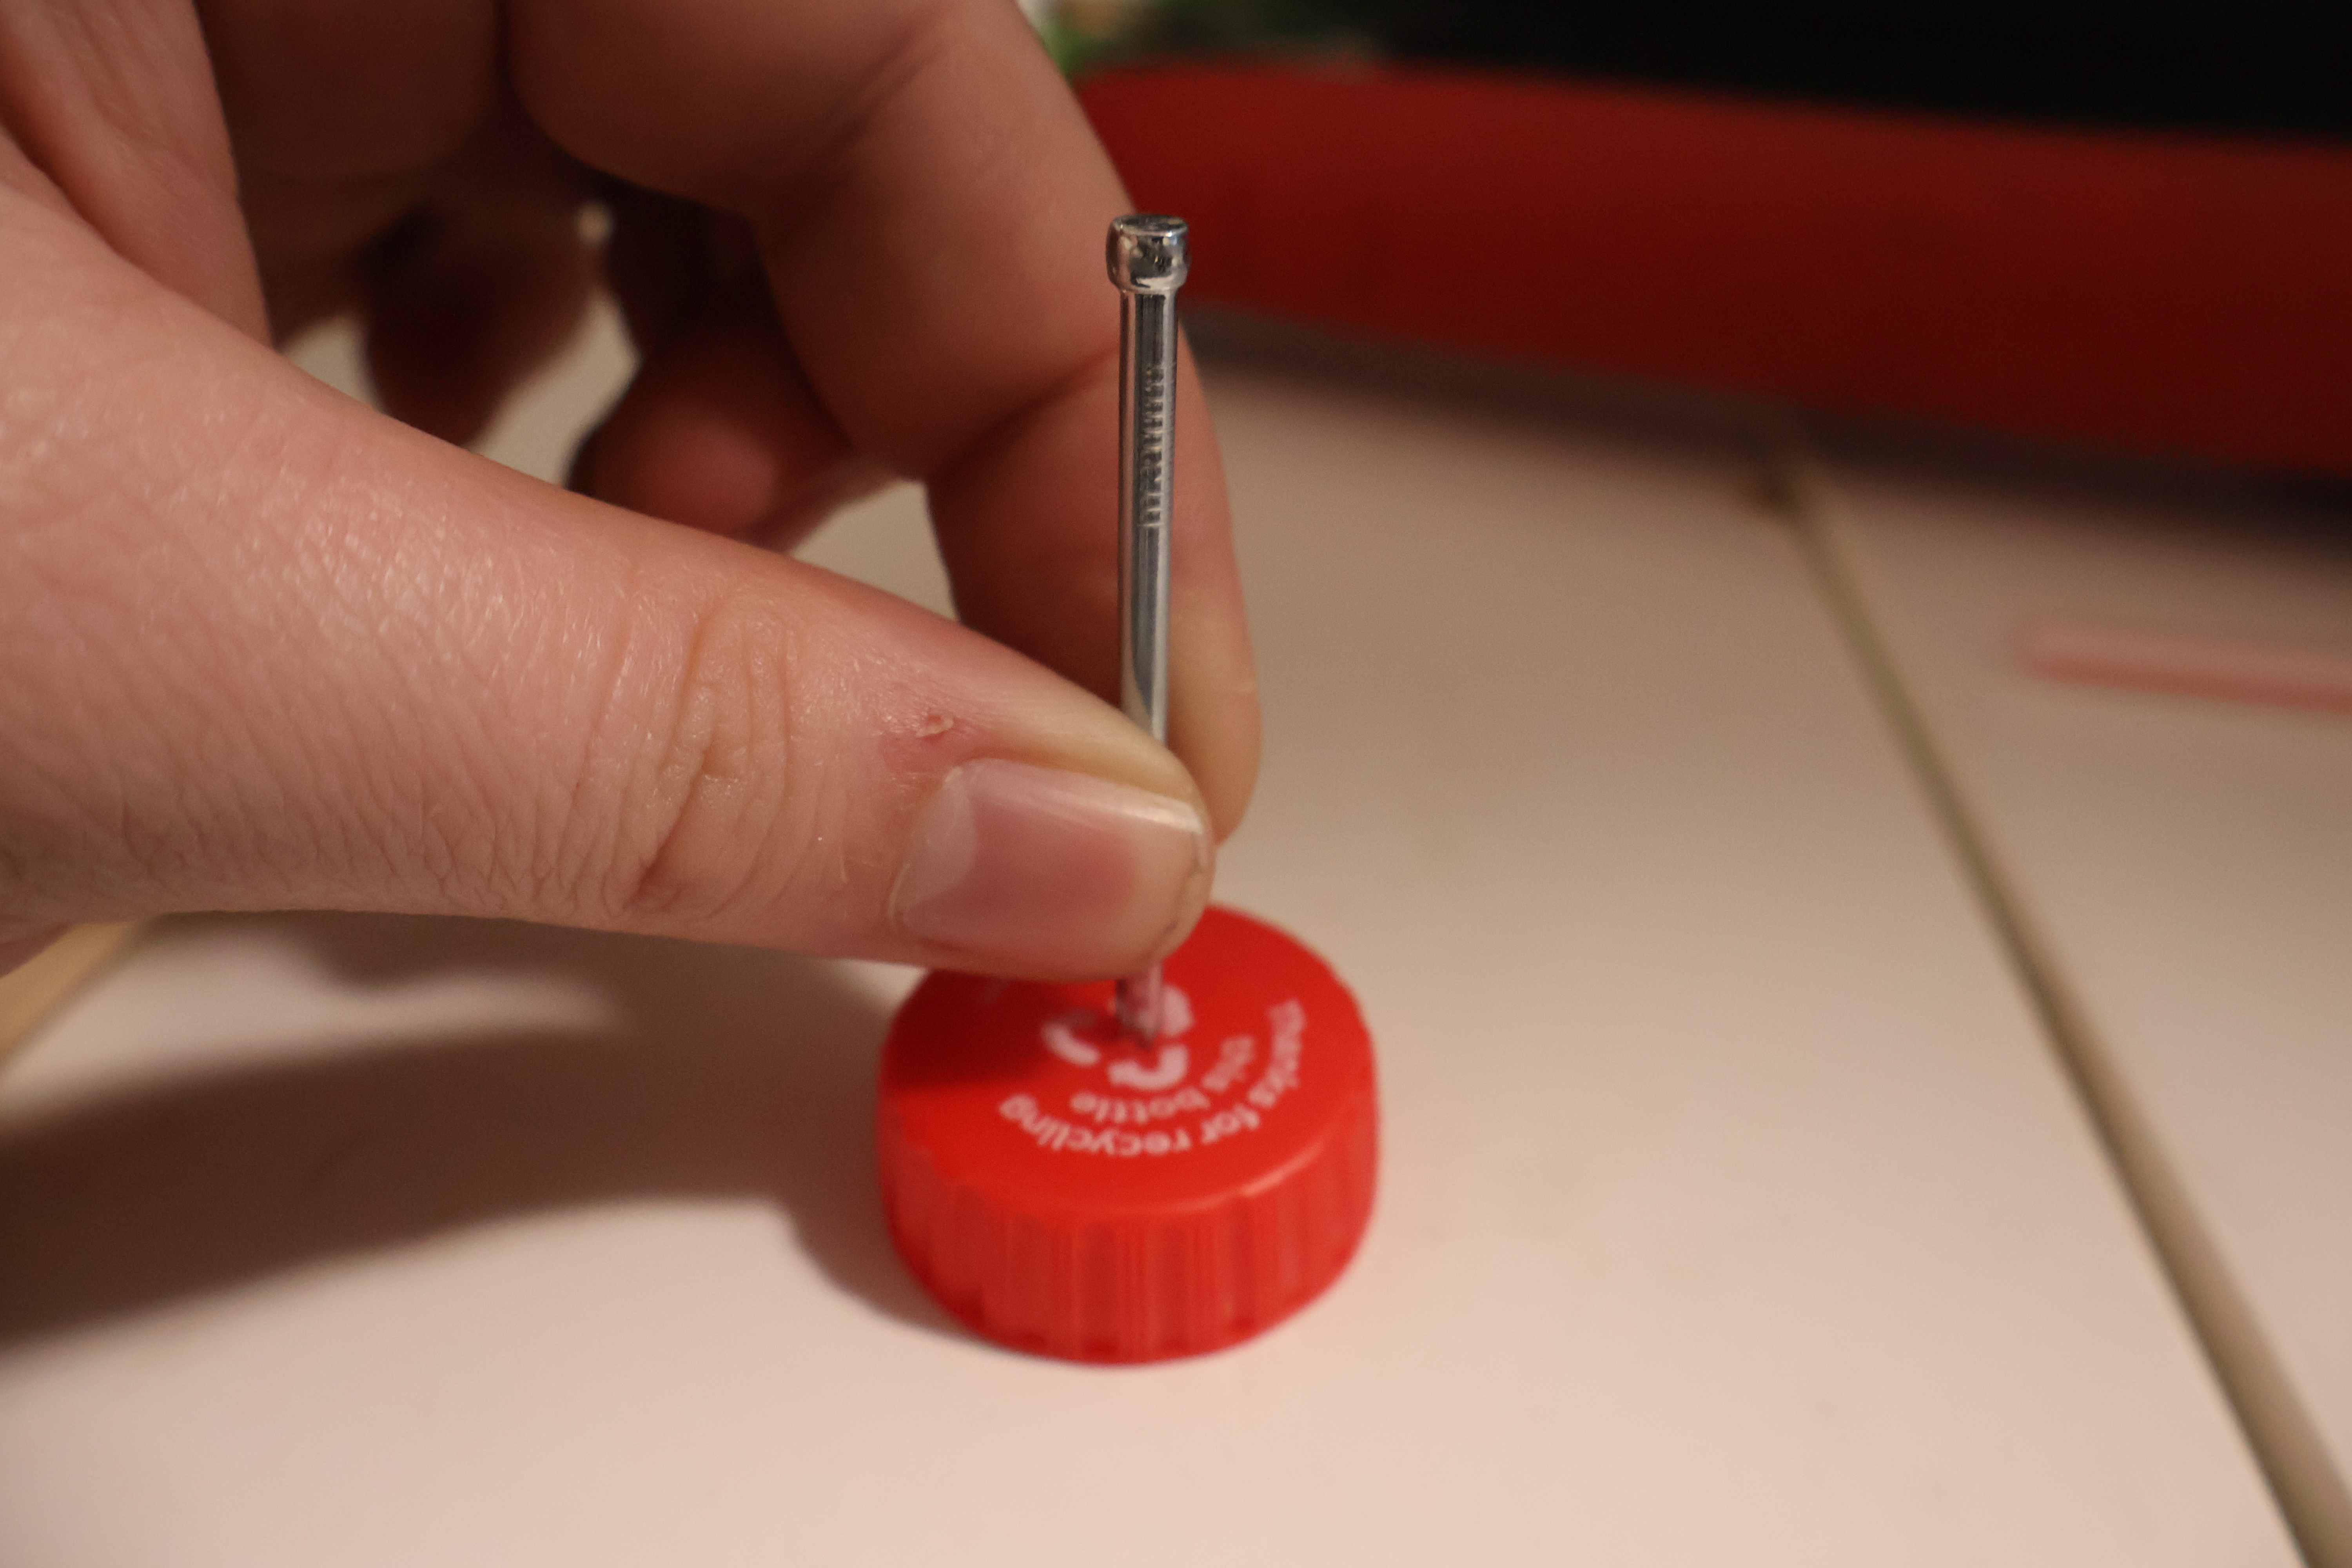 Step 5: Use a hammer and nail to create a small hole